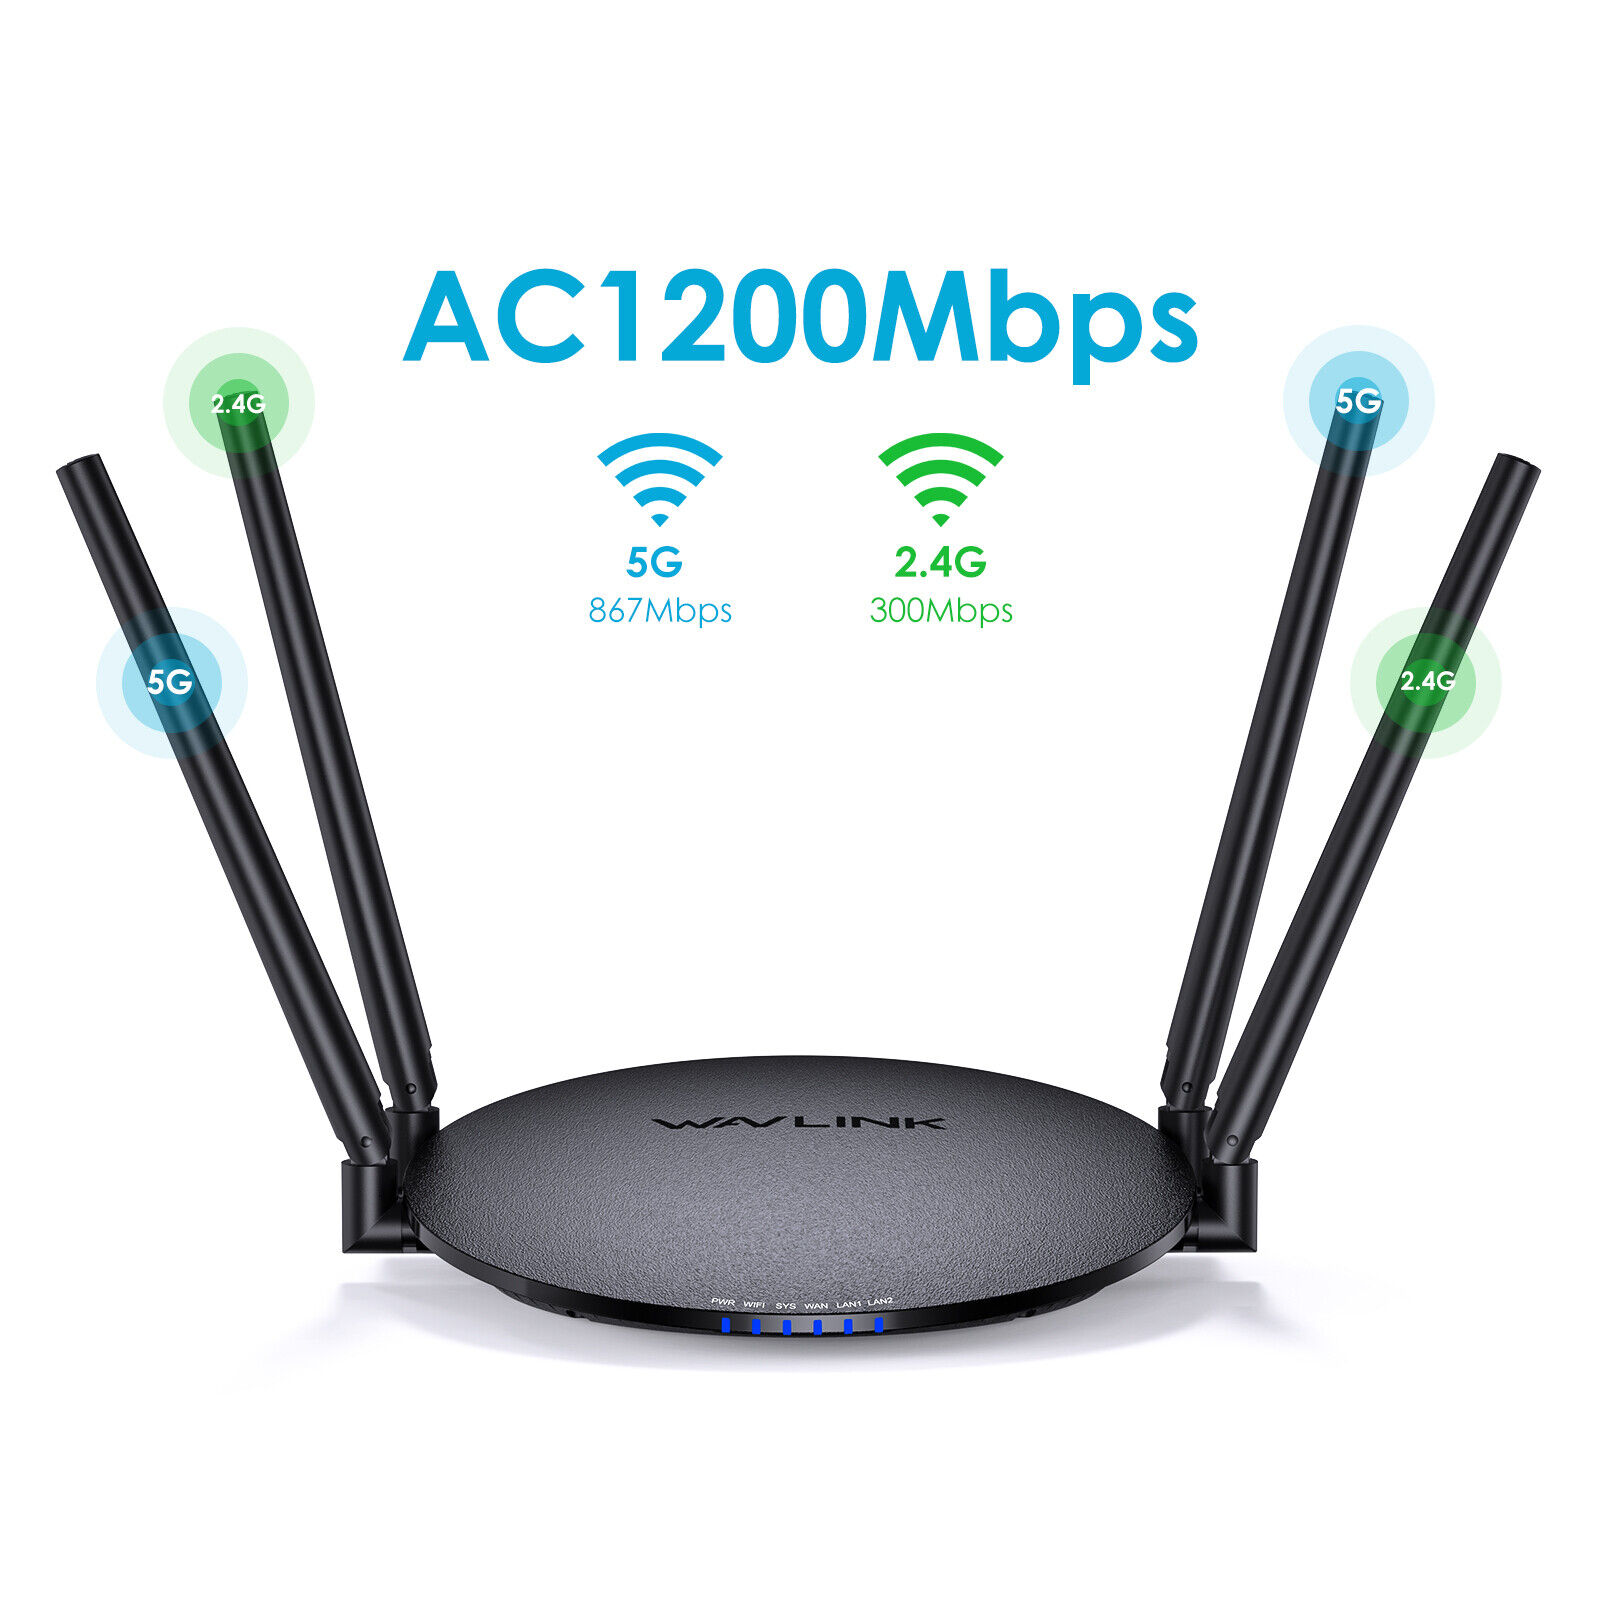 AC1200 Dual Band 5GHz/2.4GHz Wireless Router Long Range Coverage for Home Office